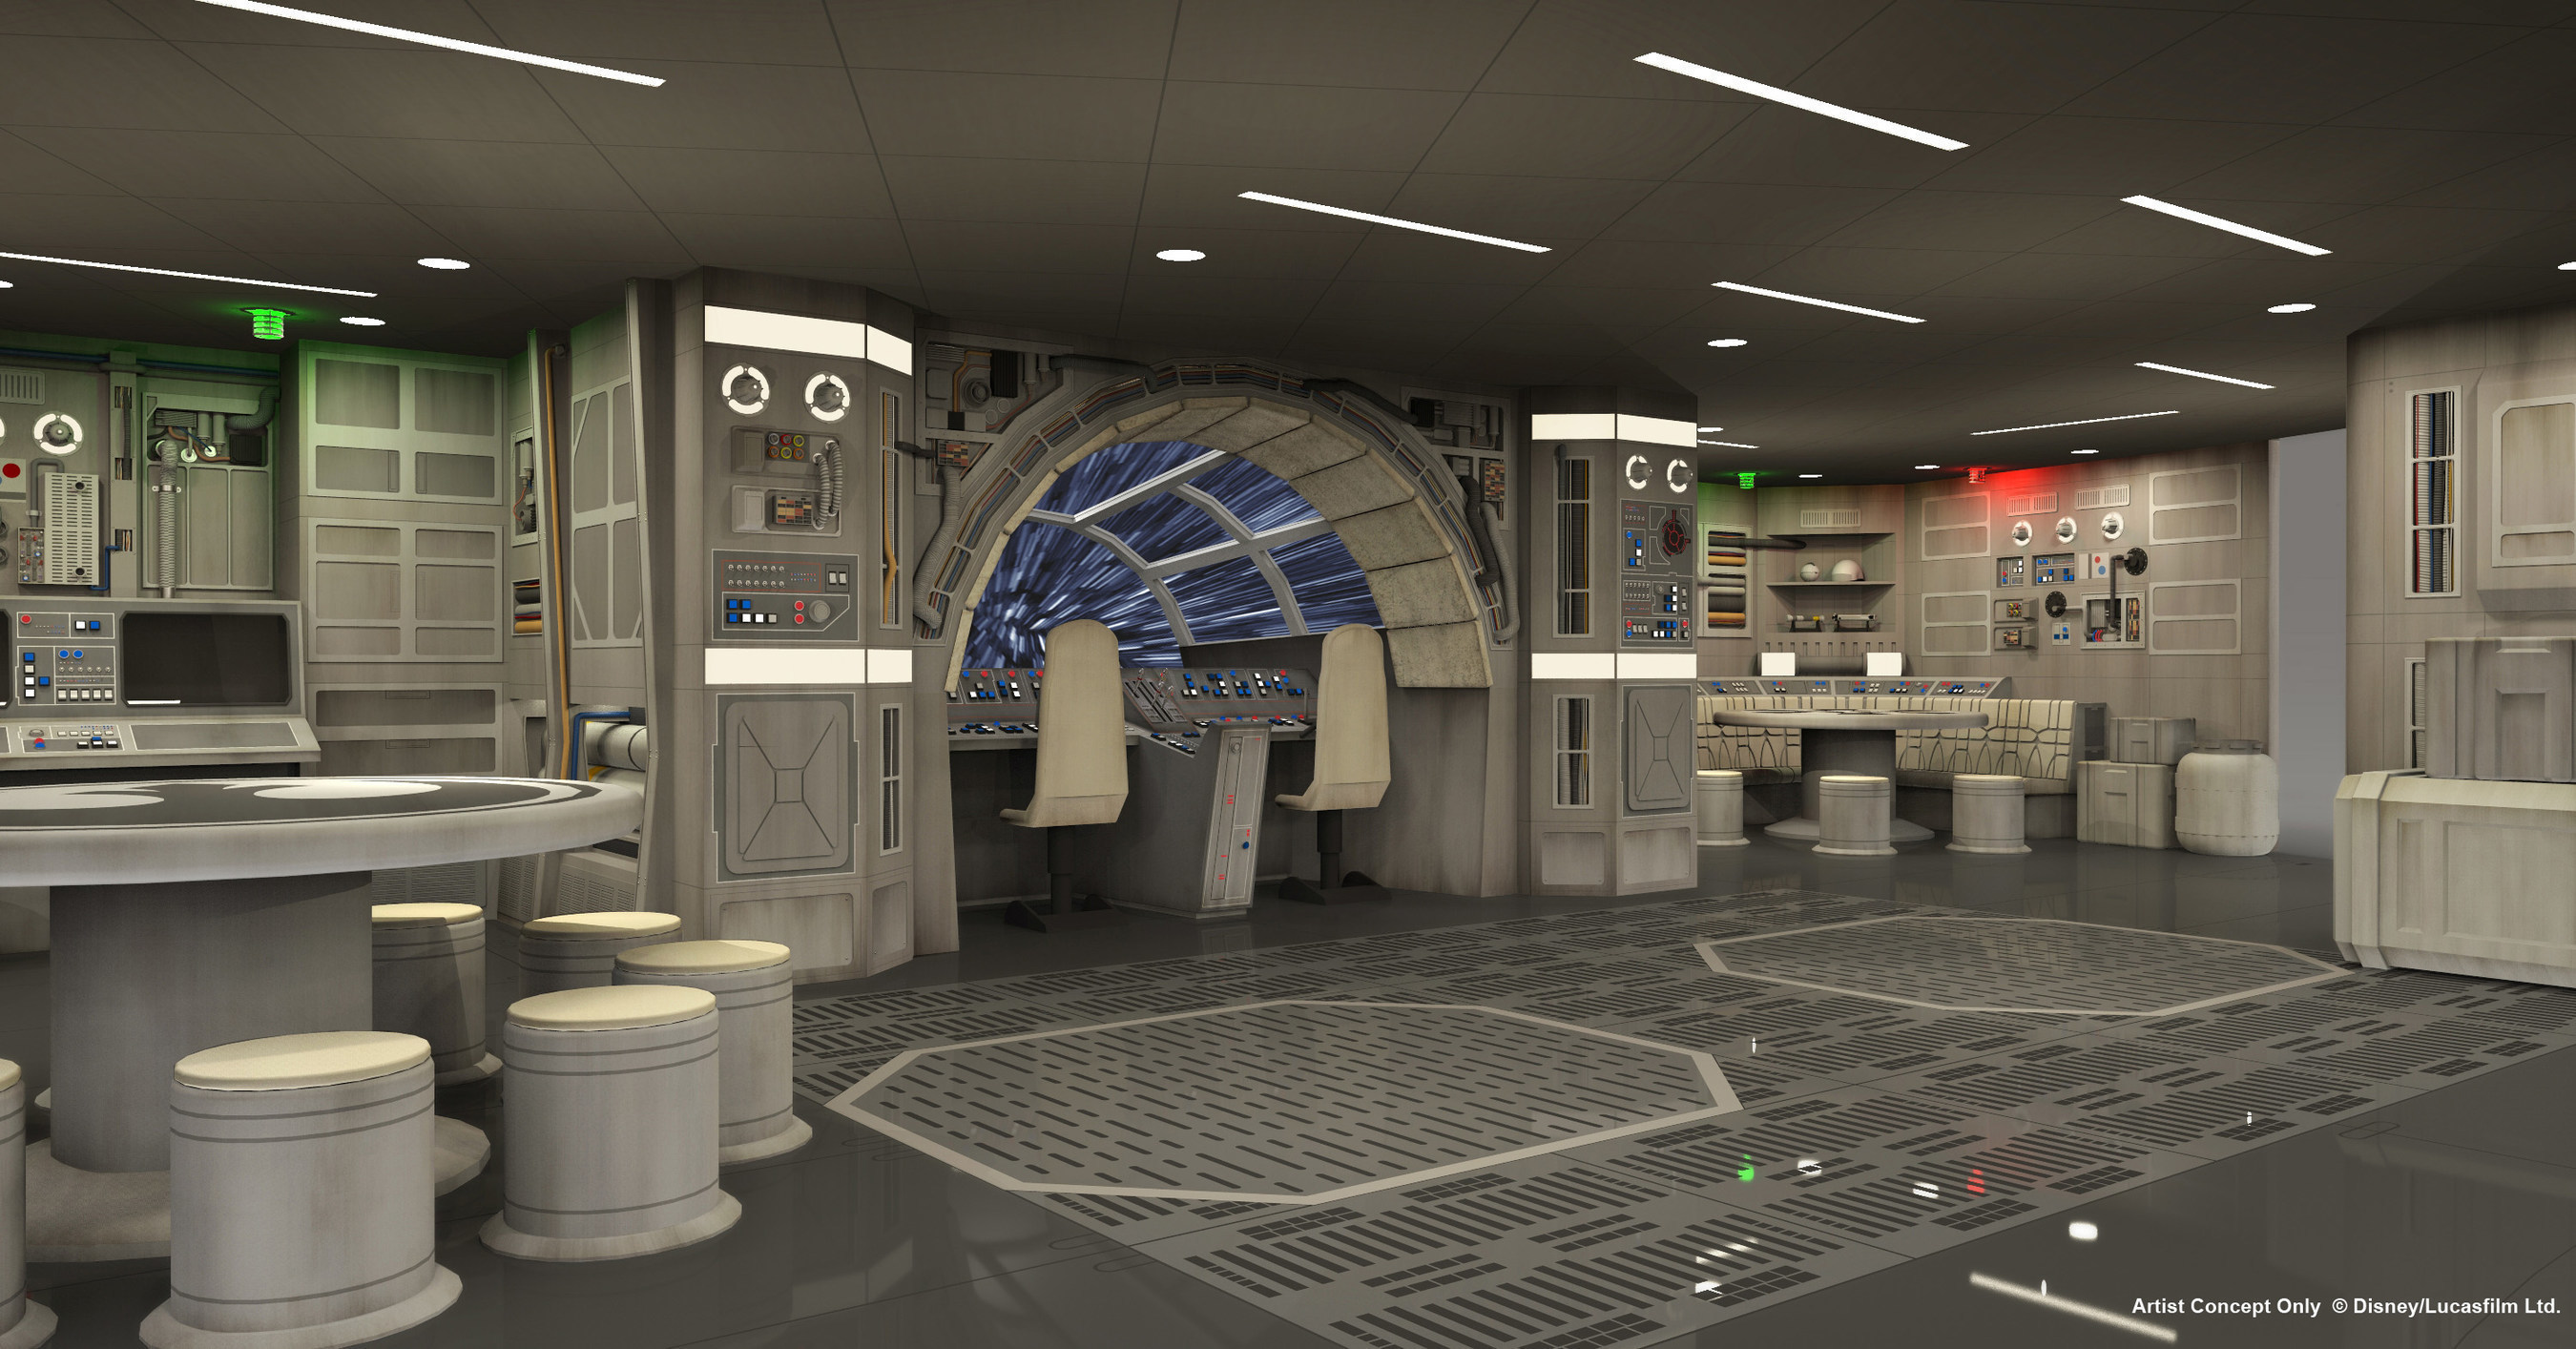 Kids in Disney's Oceaneer Club will be transported to a far away galaxy at Star Wars: Millennium Falcon, a Force-filled play area inspired by the spacecraft from the legendary saga. This new space on the Disney Dream debuts on the Oct. 26 four-night voyage from Port Canaveral to the Bahamas. (Artist Concept)